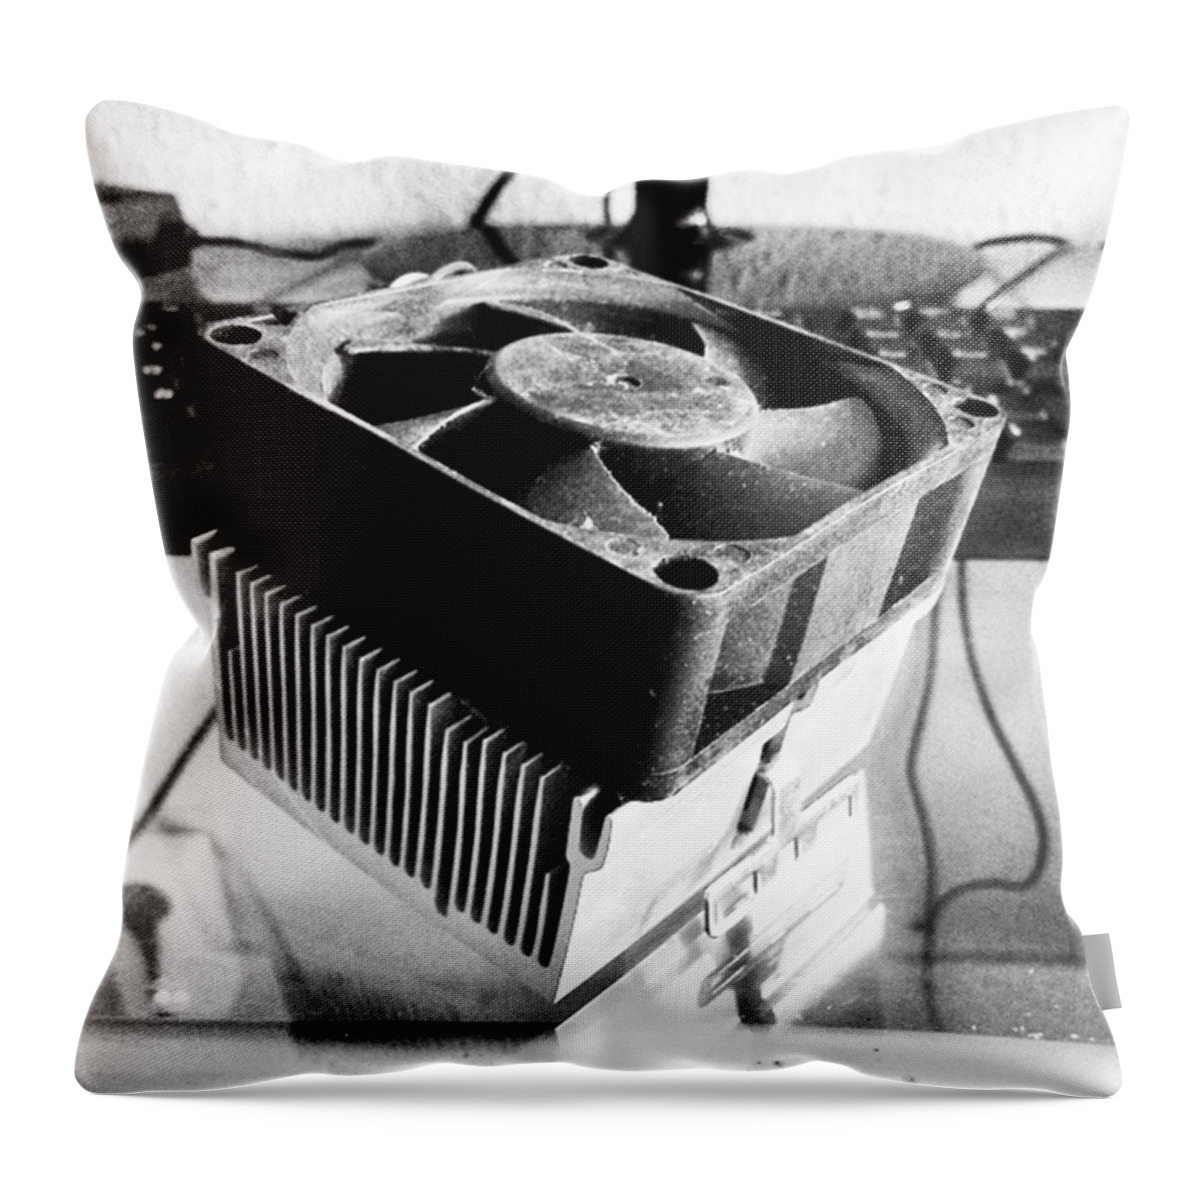 Techie Throw Pillow featuring the photograph #hters #hashtags #computers #device #4 by Andreas Rabe